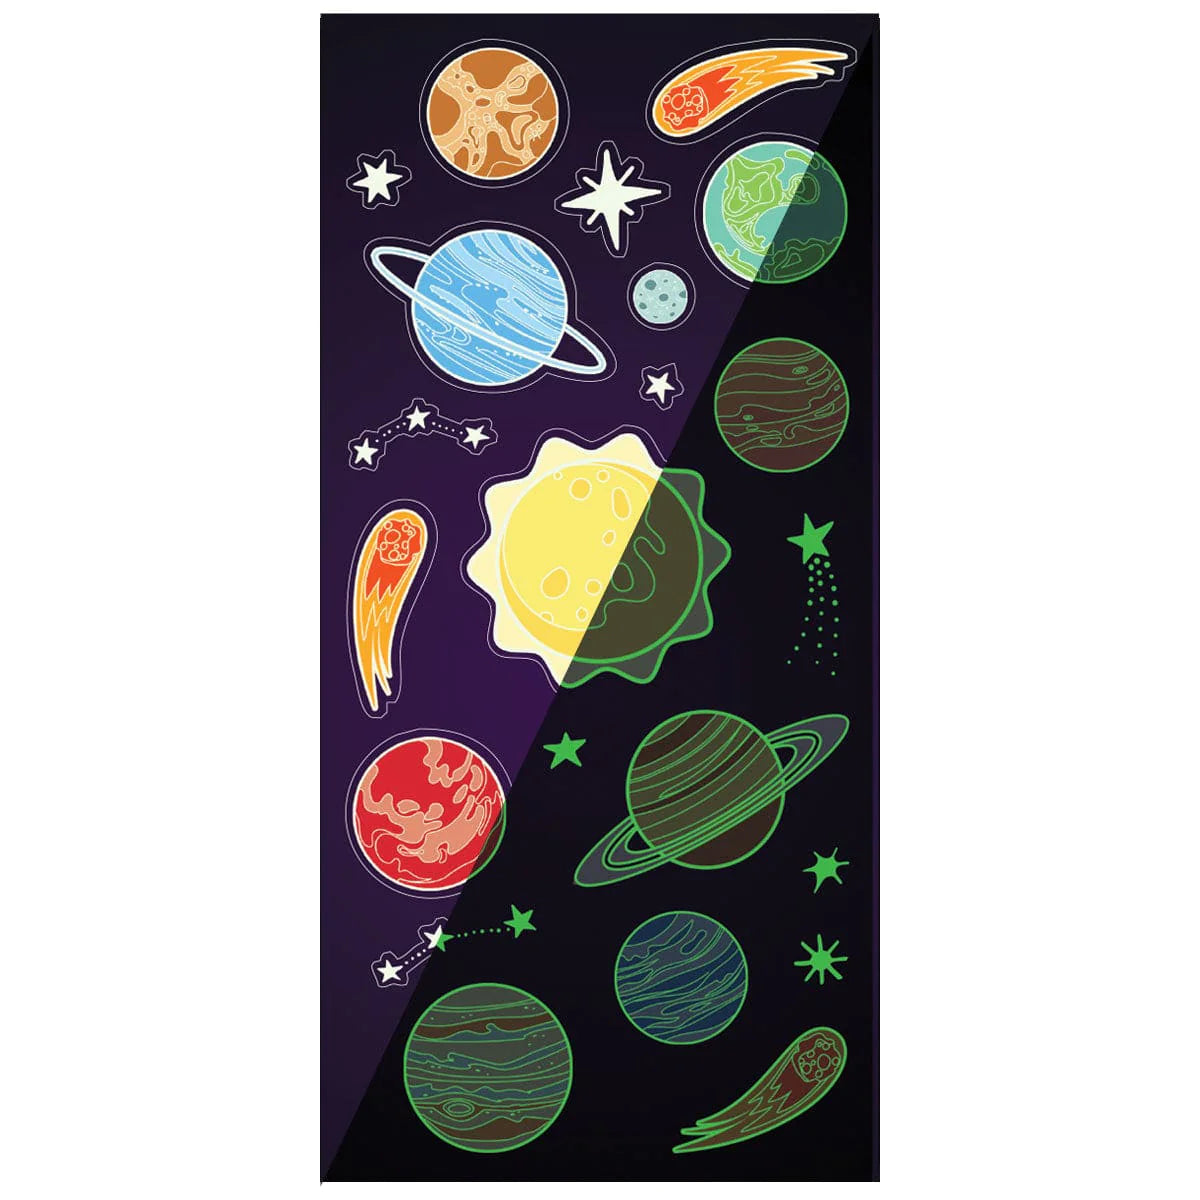 Glow in the Dark Stickers - Solar System Planets